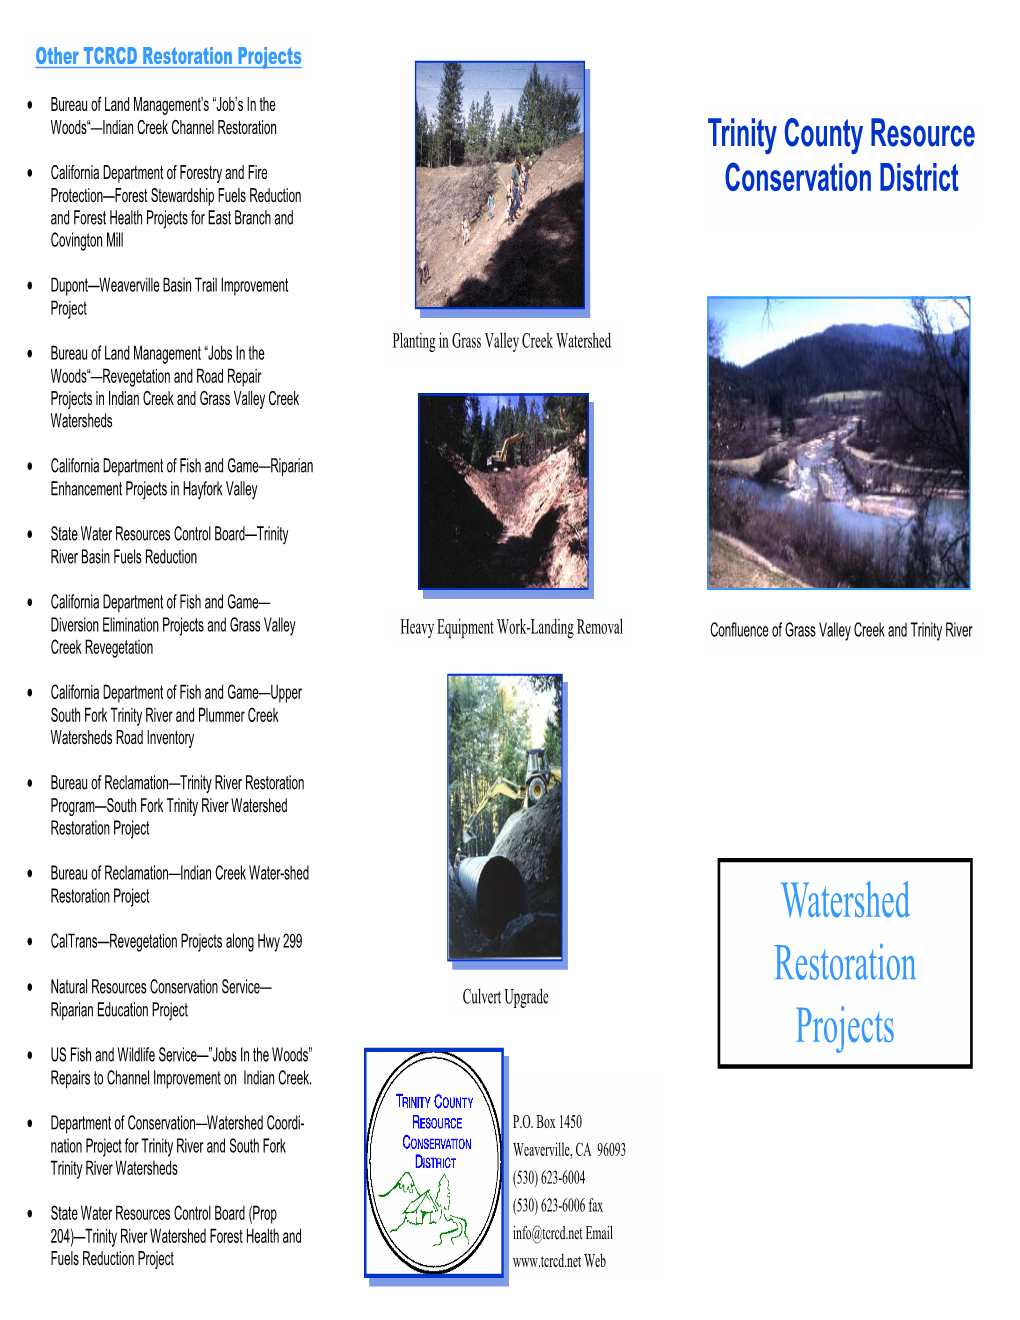 Watershed Restoration Projects